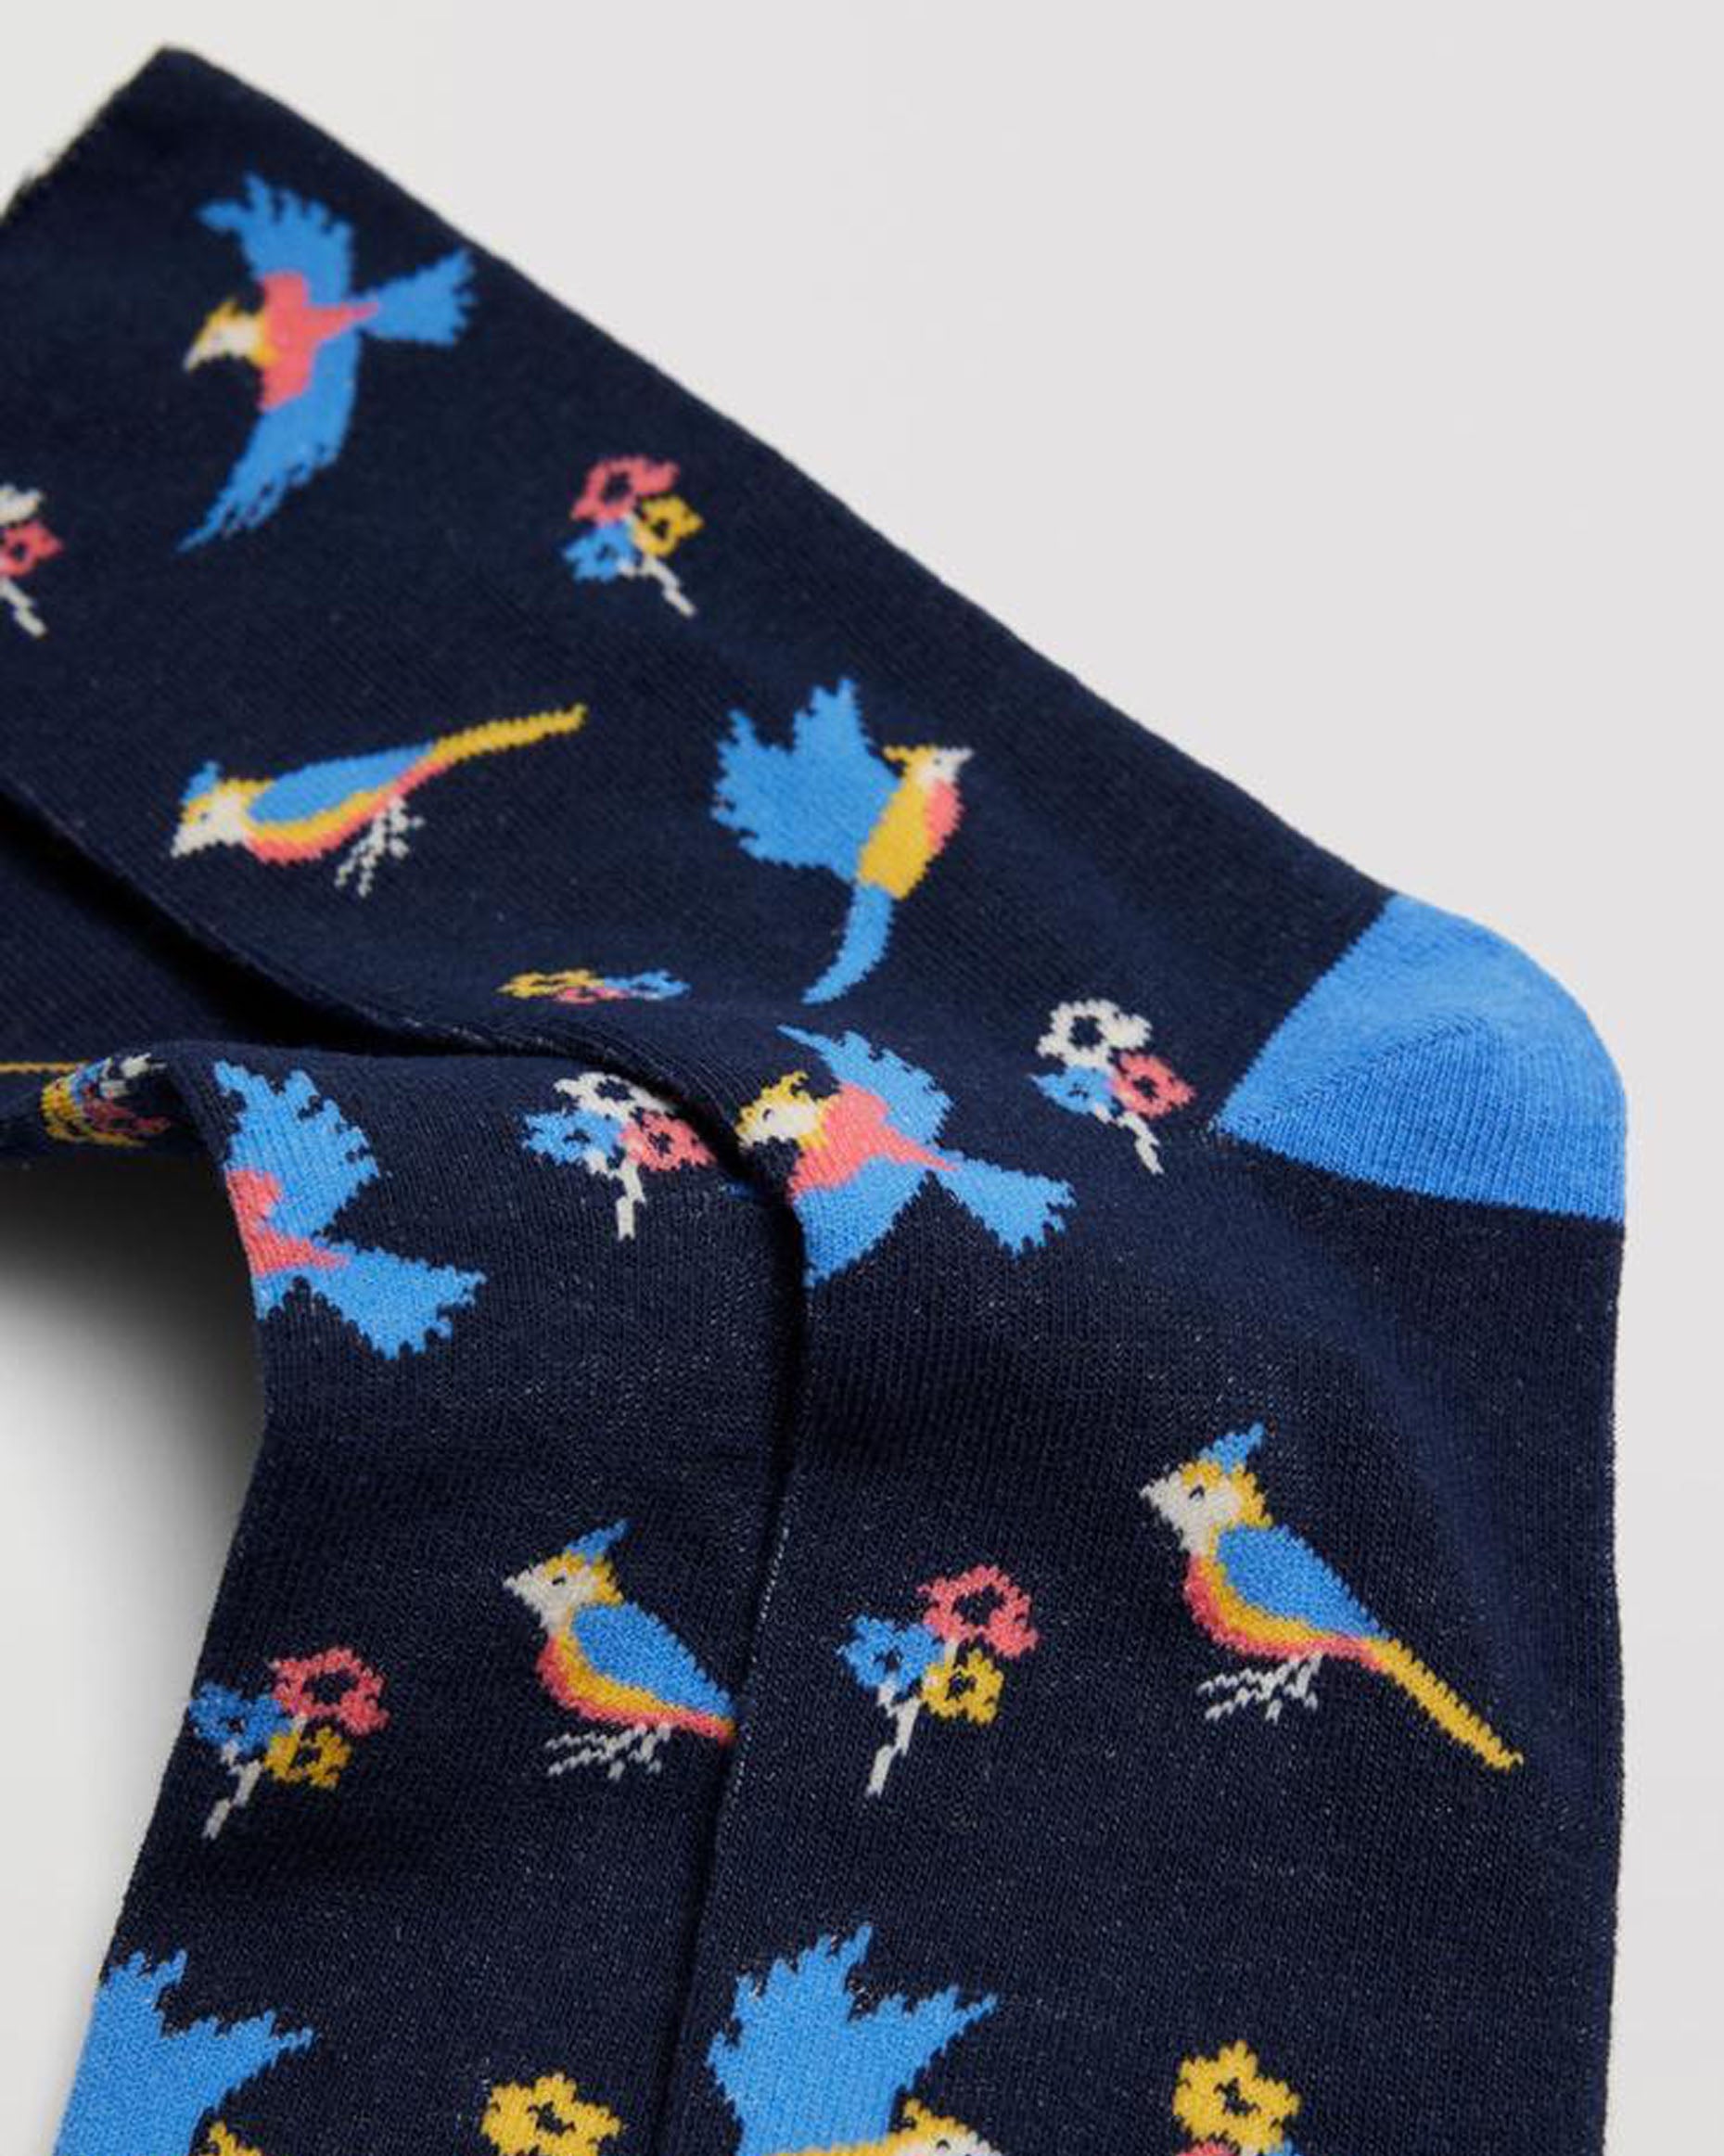 Ysabel Mora 12881 Bird Socks - Navy cotton socks with an all over multicoloured bird and flower pattern in sky blue, yellow, pale pink and white with a sky blue toe and heel and no cuff.